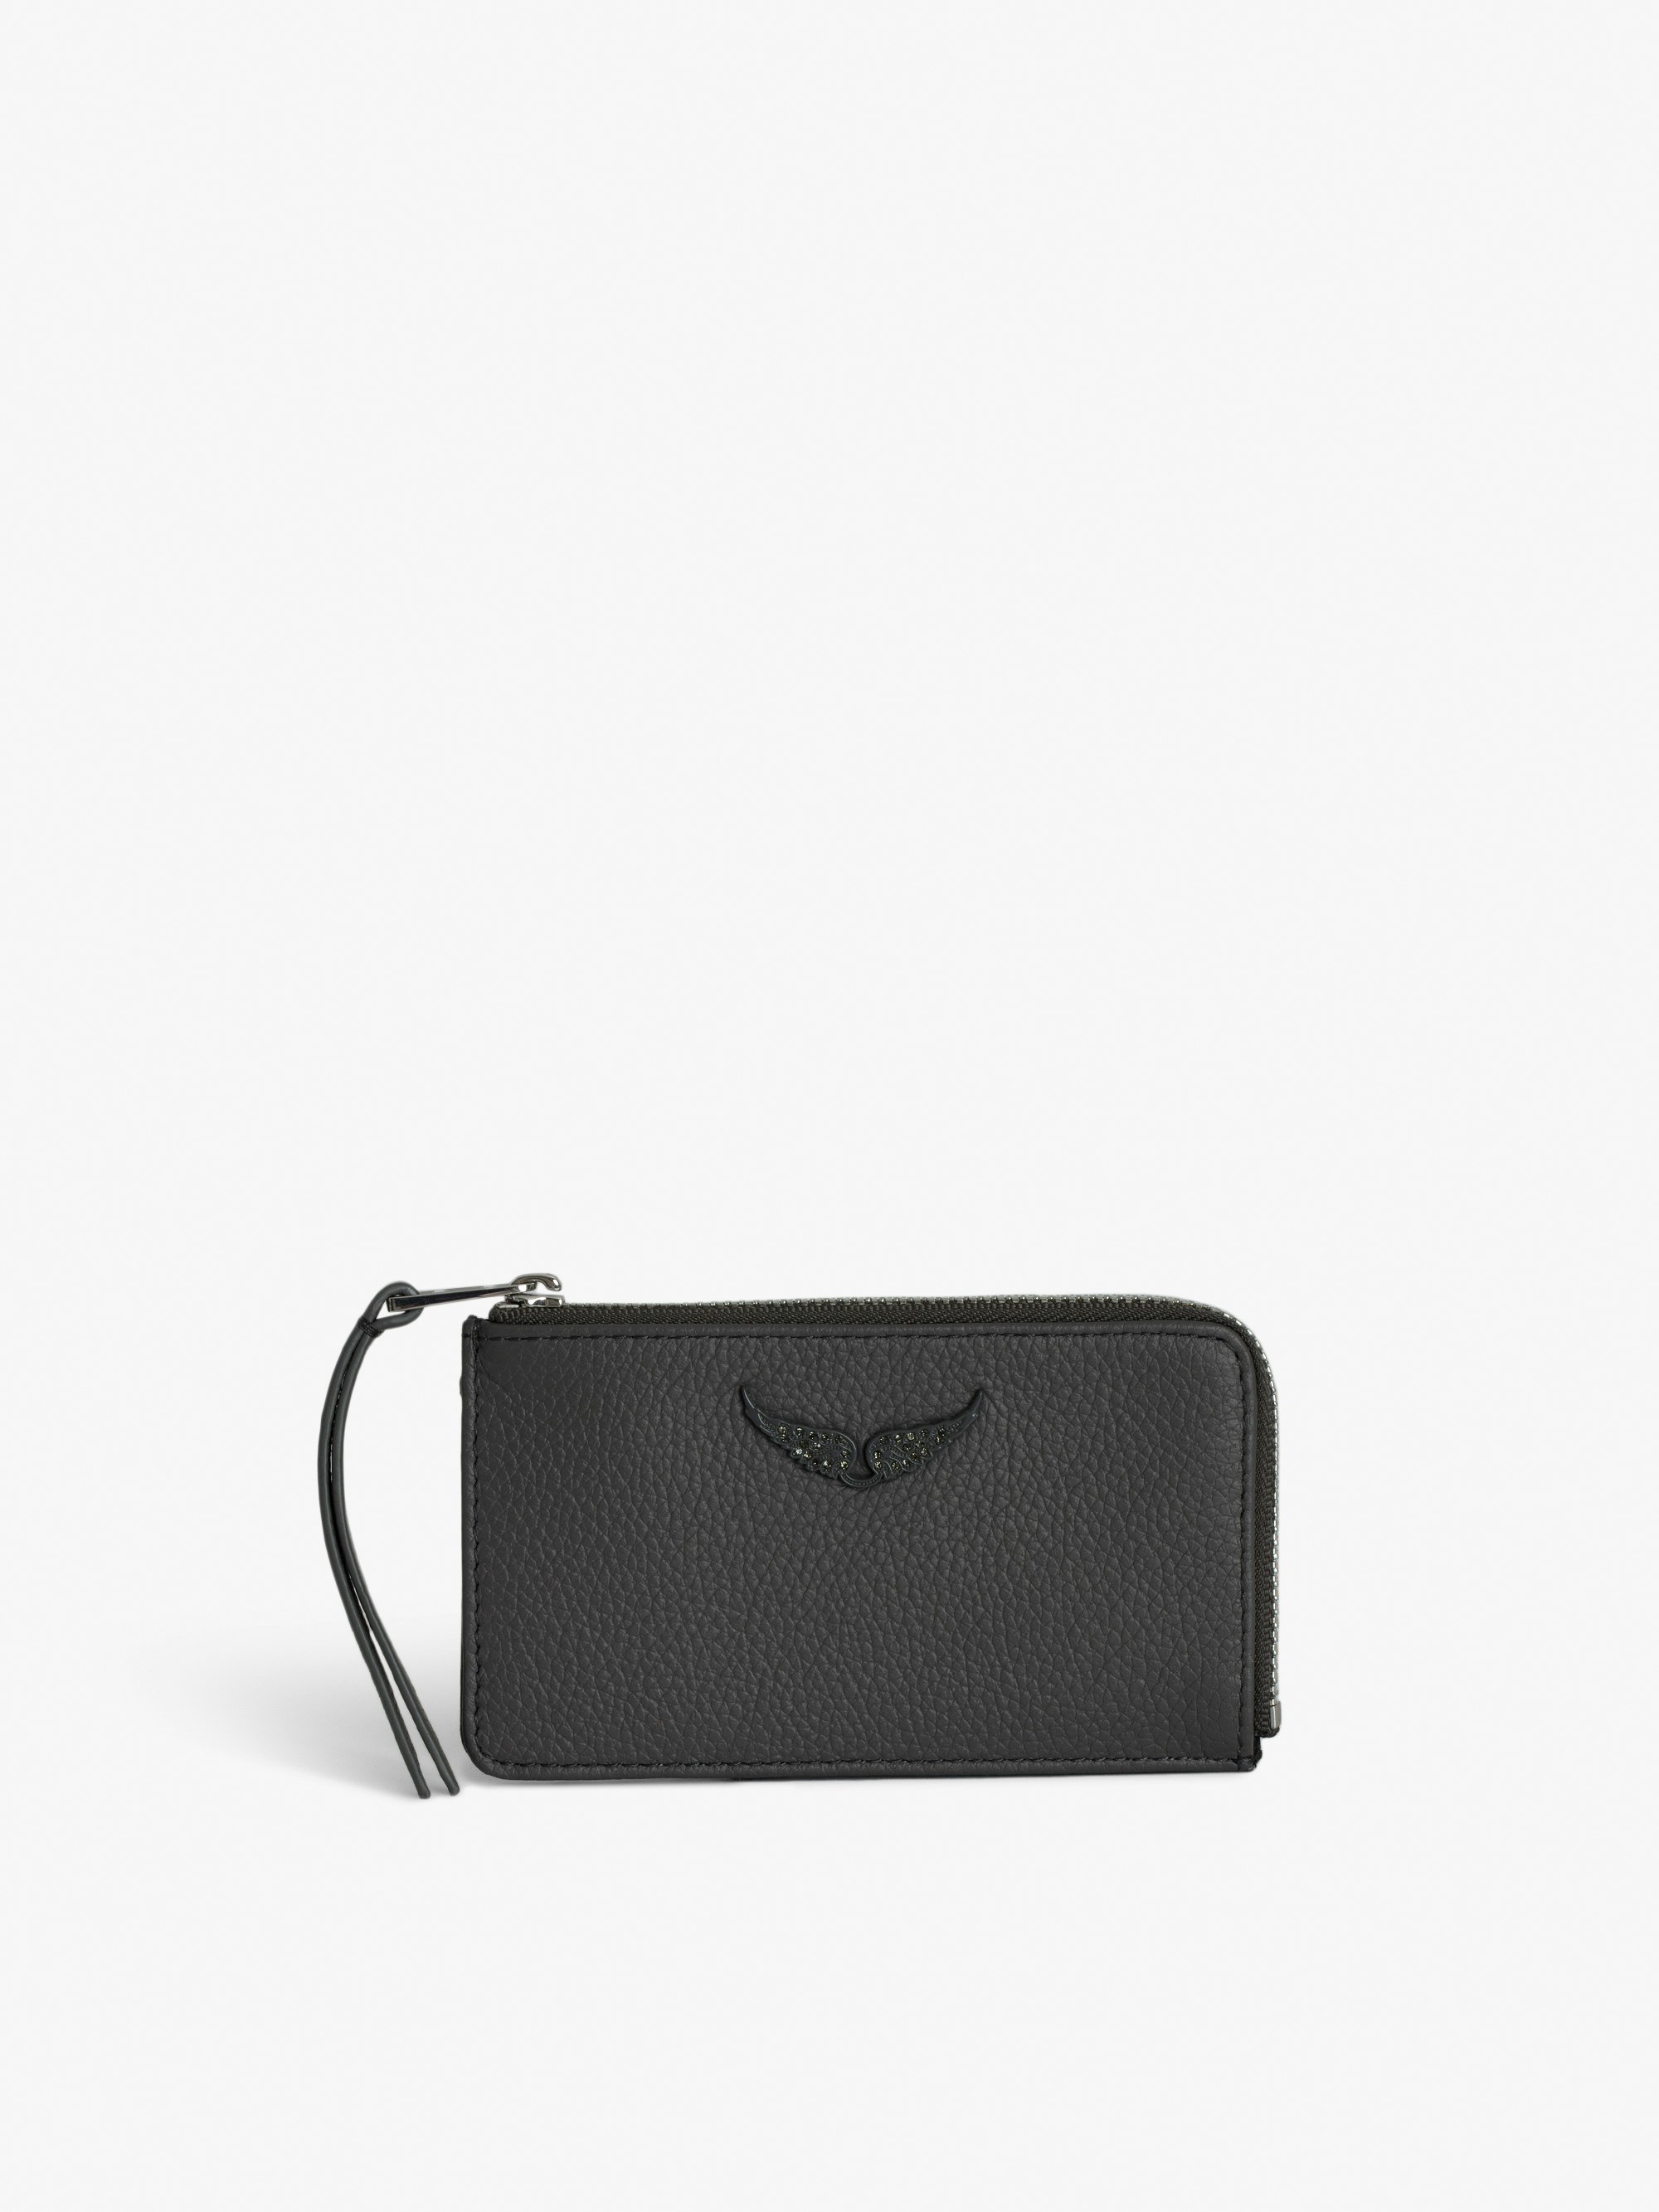 ZV Card Card Holder - Grained leather card holder with signature wings.